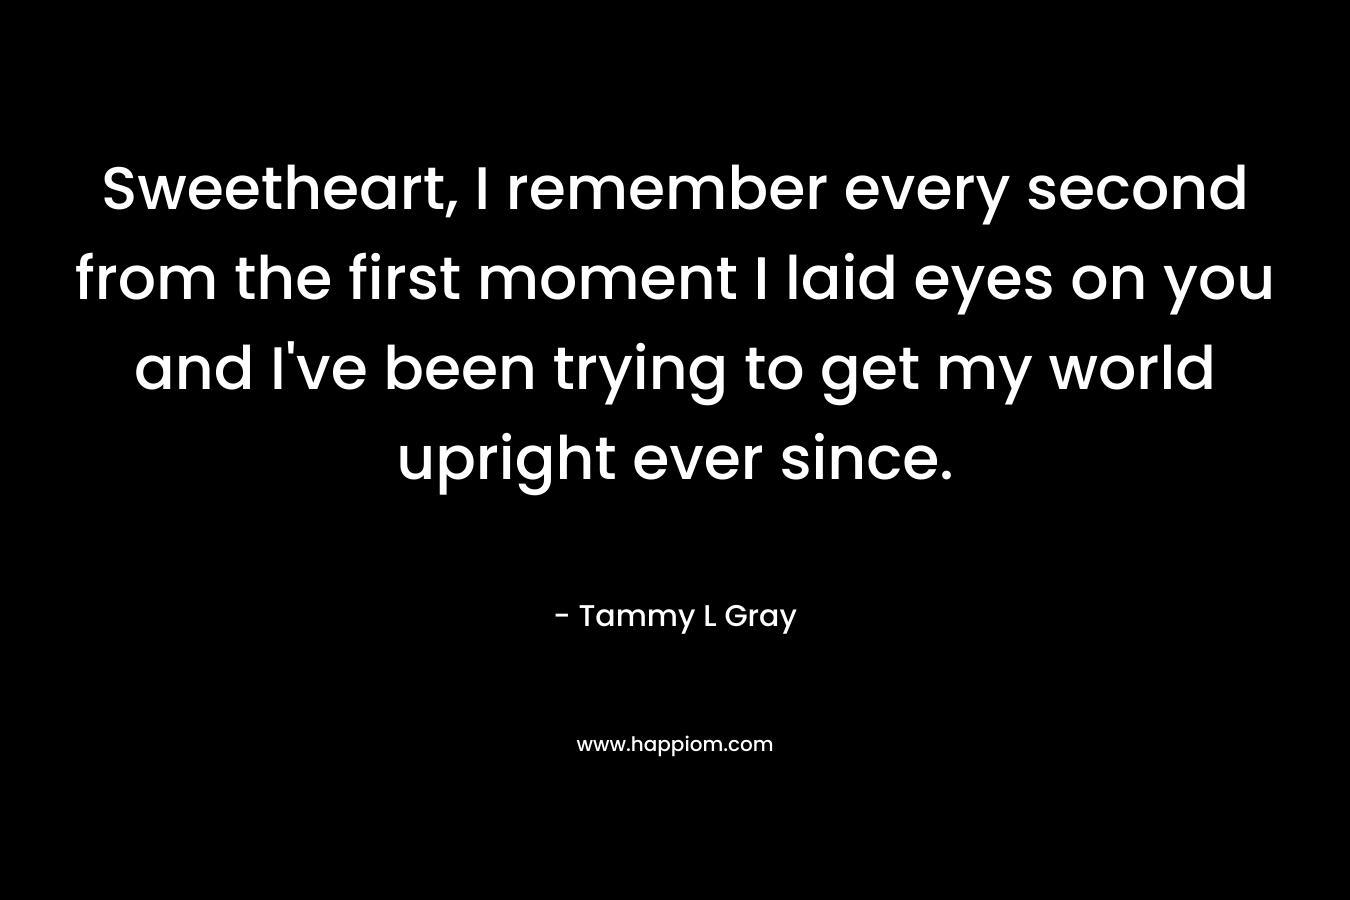 Sweetheart, I remember every second from the first moment I laid eyes on you and I’ve been trying to get my world upright ever since. – Tammy L Gray